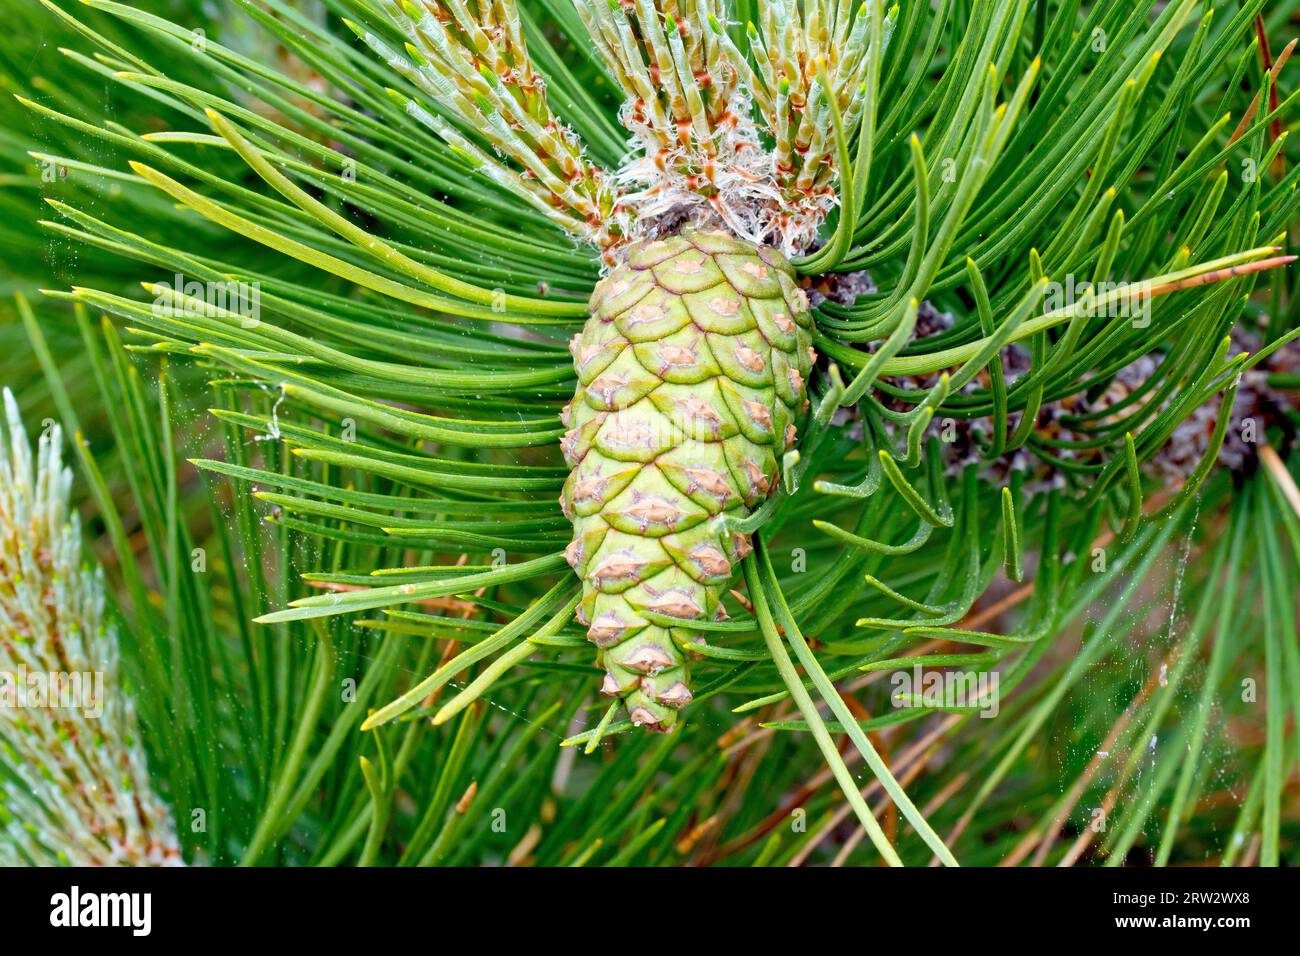 Black Pine (pinus nigra), close up showing a green immature pine cone growing from the end of a branch of the commonly planted tree. Stock Photo